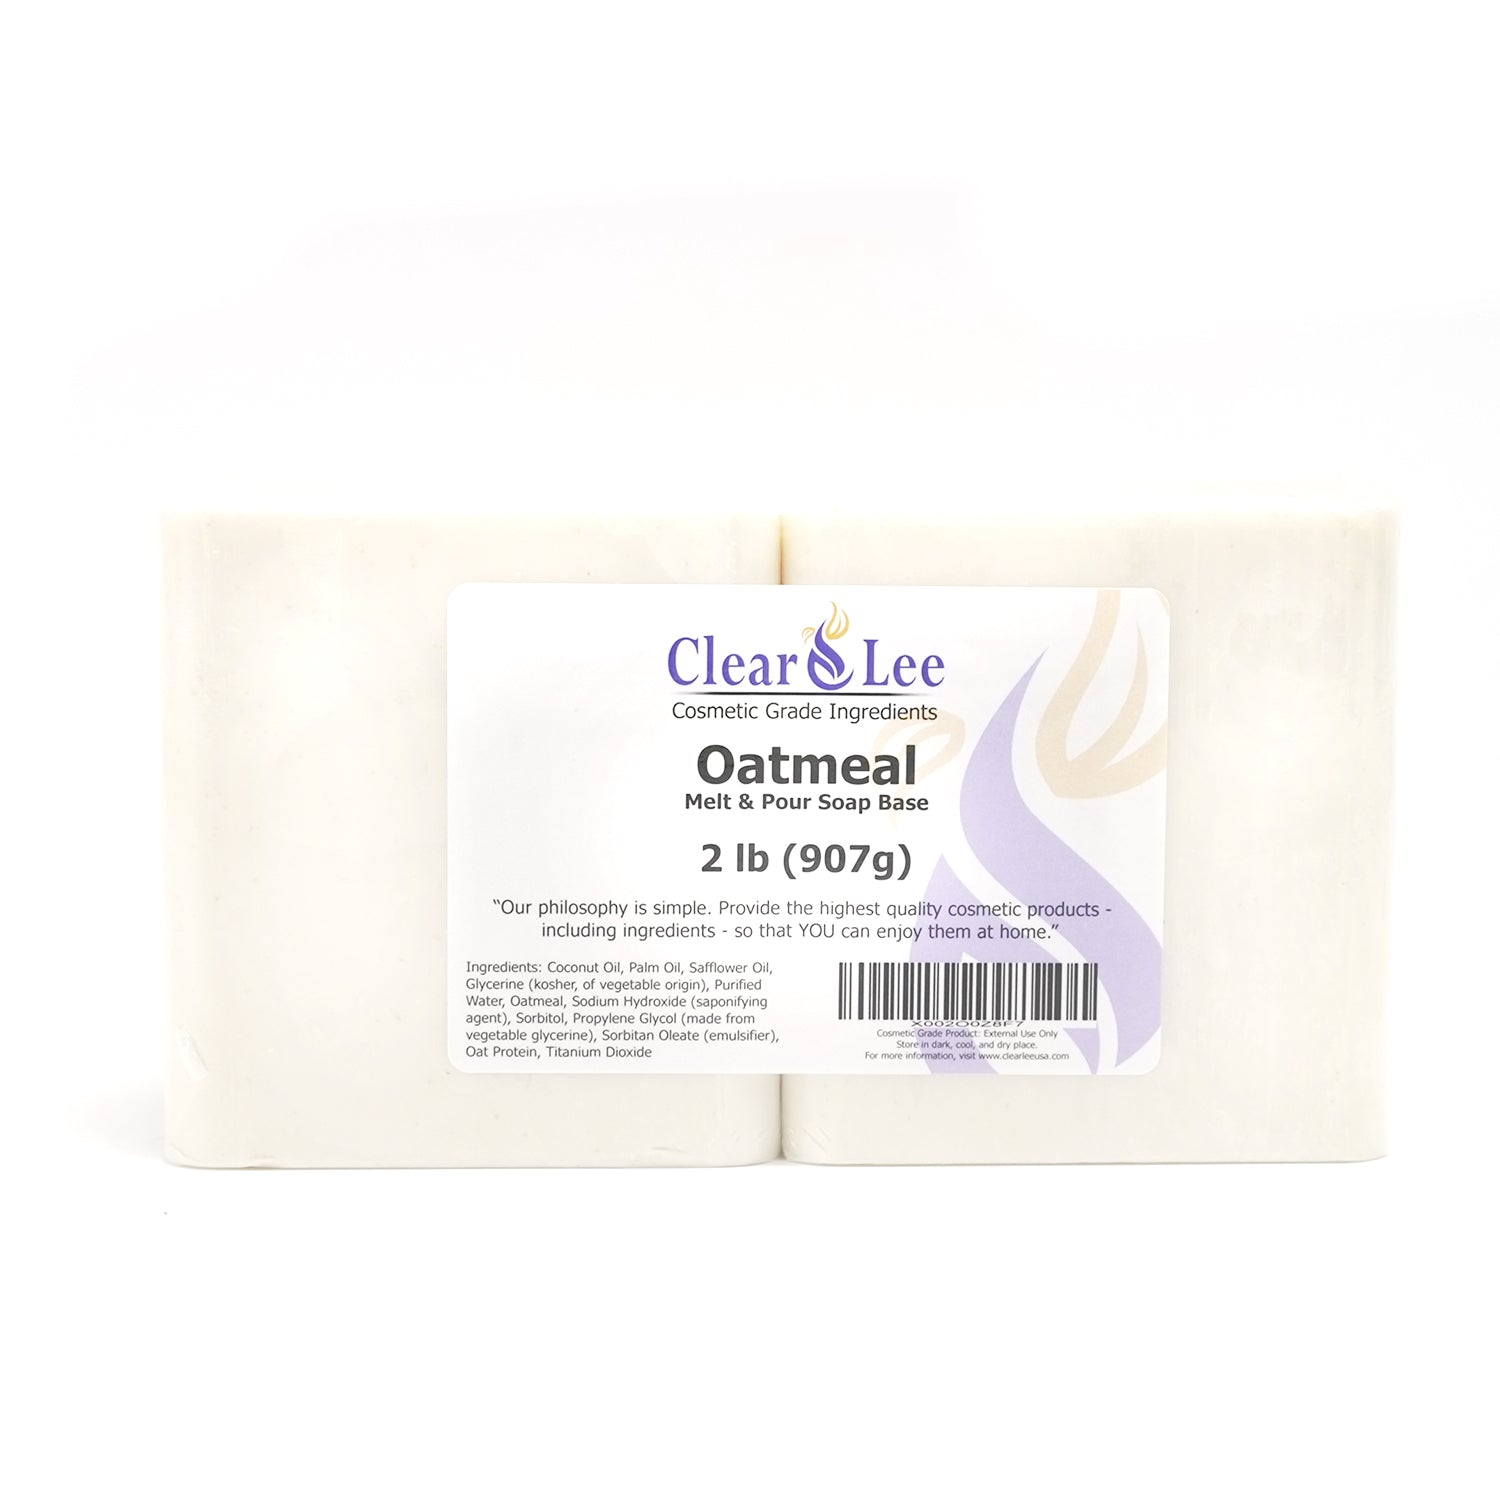 2 lb EXFOLIATING OATMEAL MELT AND POUR SOAP Opaque 100% All